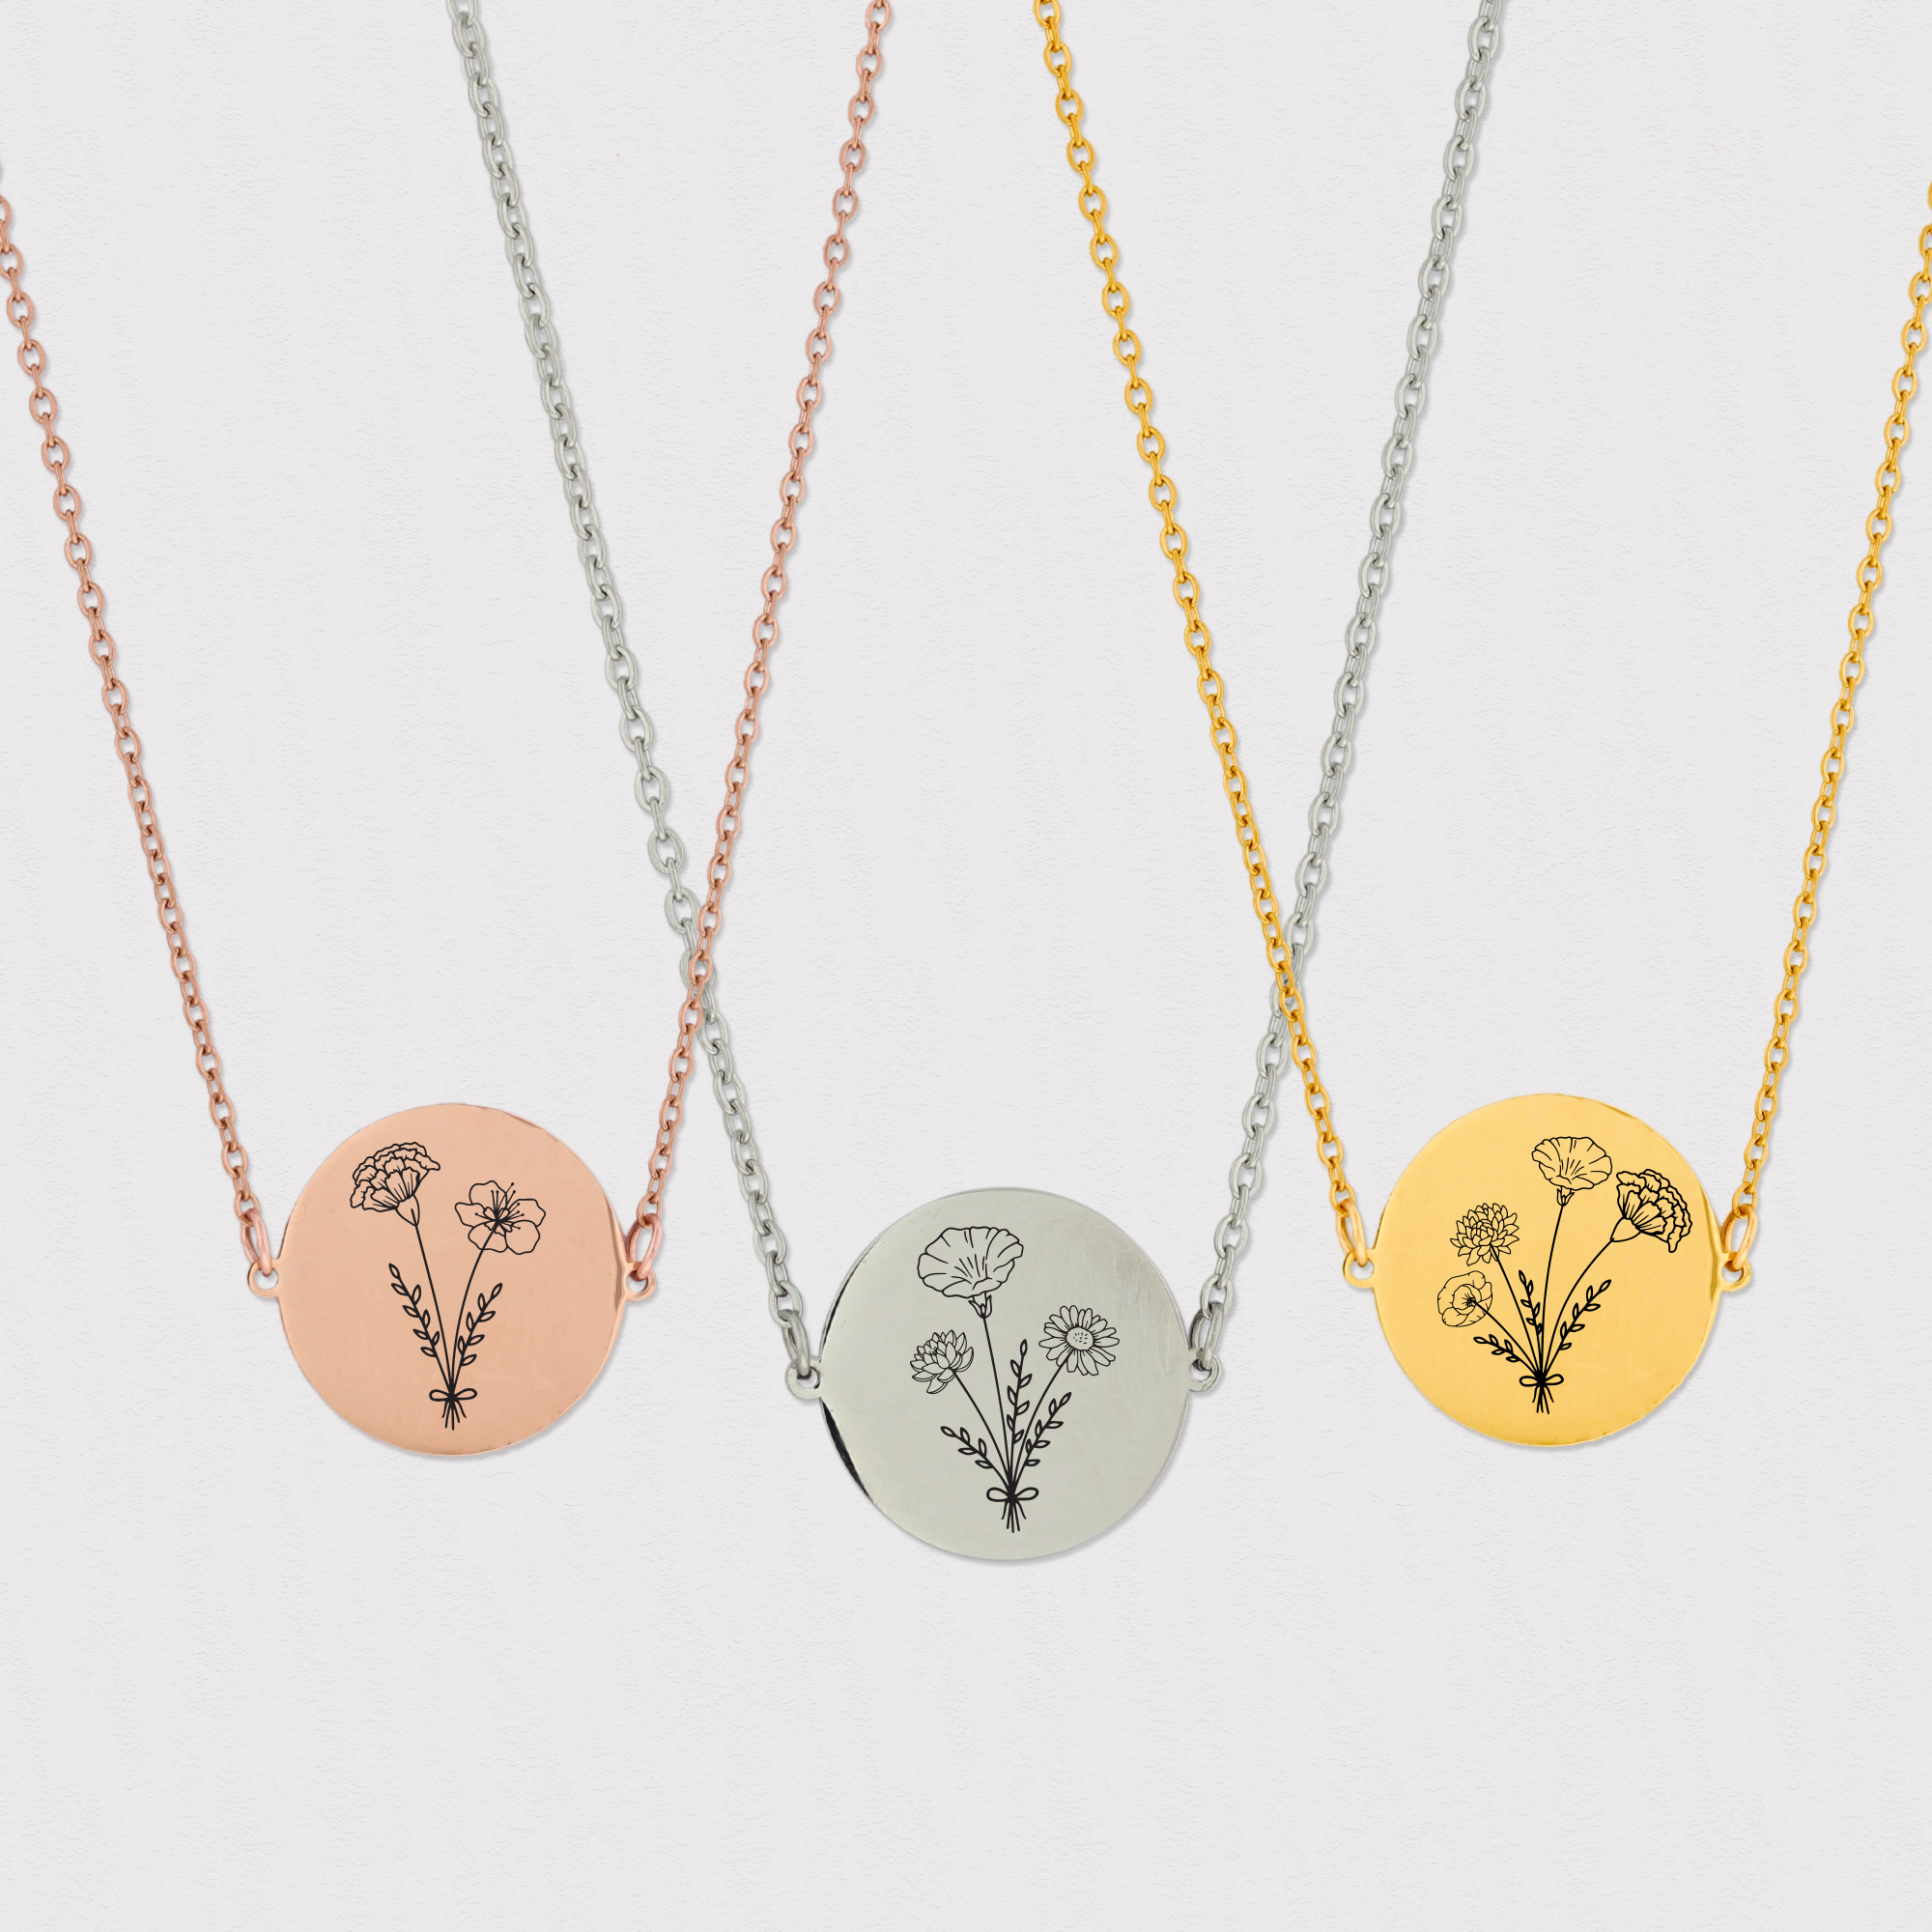 Engraved Birth Flowers Necklace KCL 19 B